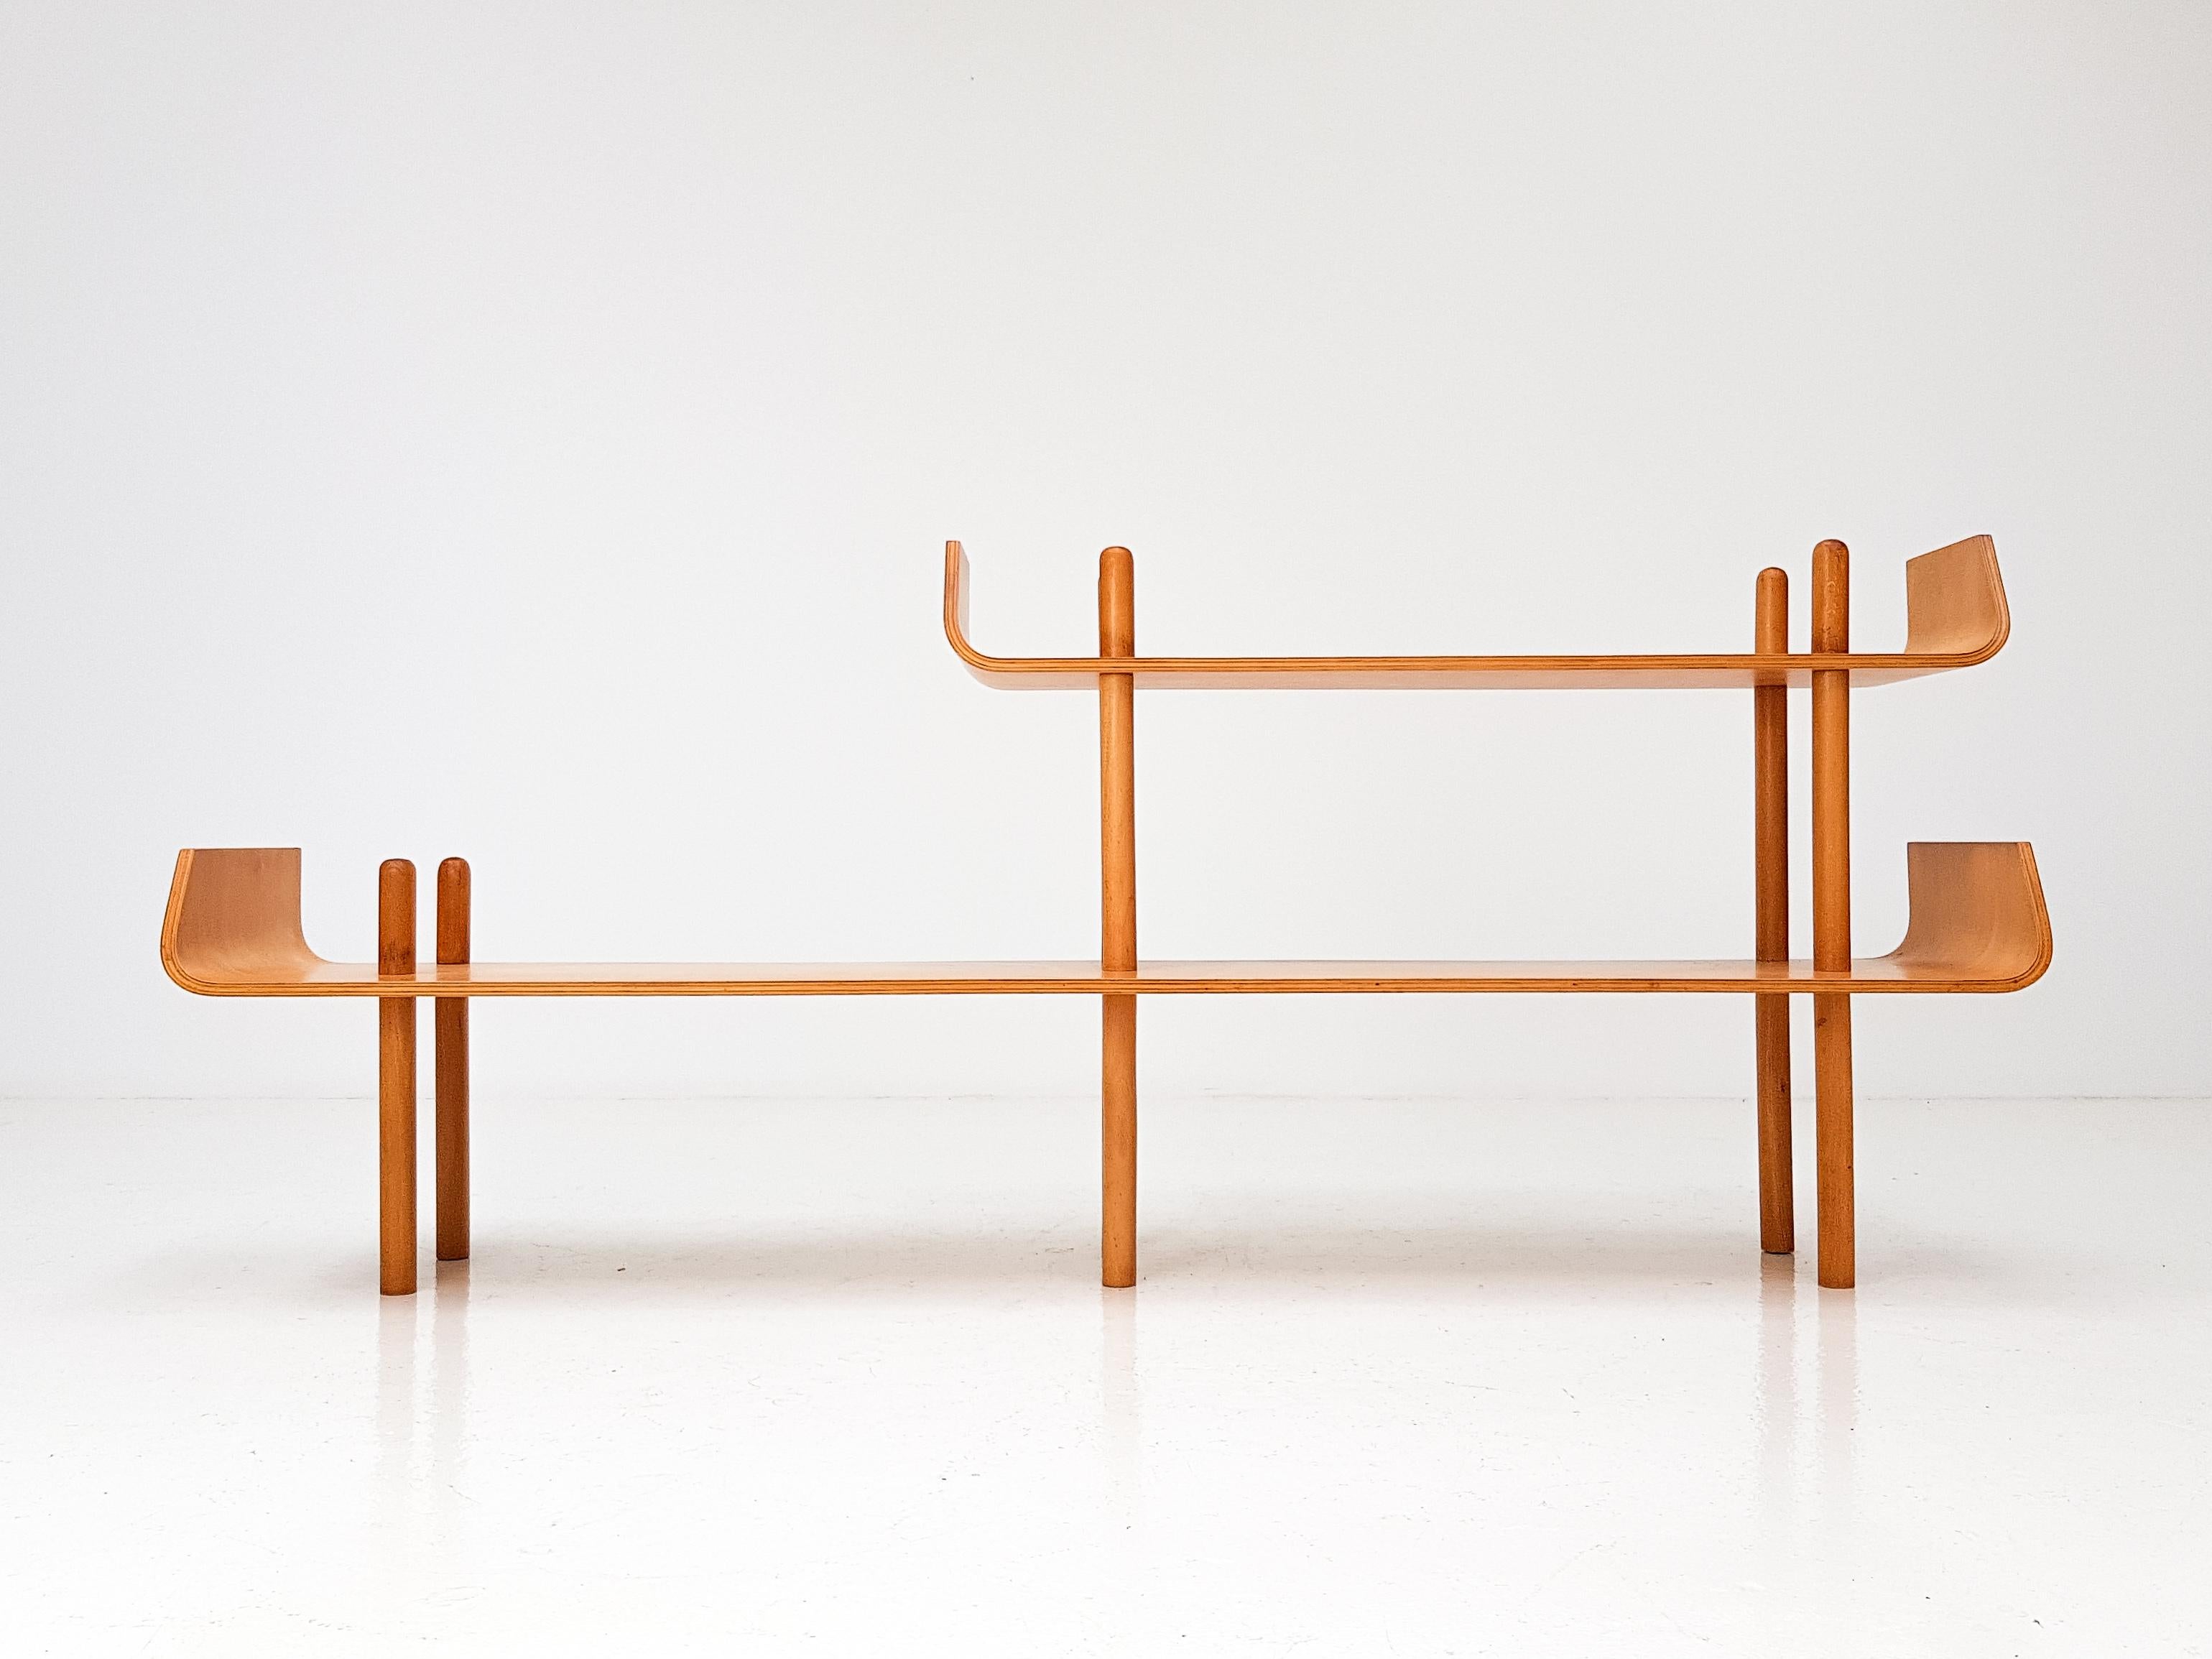 A birch plywood shelving unit by Willem Lutjens for De Boer Gouda, with the characteristic curved ends of the shelves which has made this such a famous and now rare design. The piece was designed in 1953 and manufactured in the Netherlands.

The